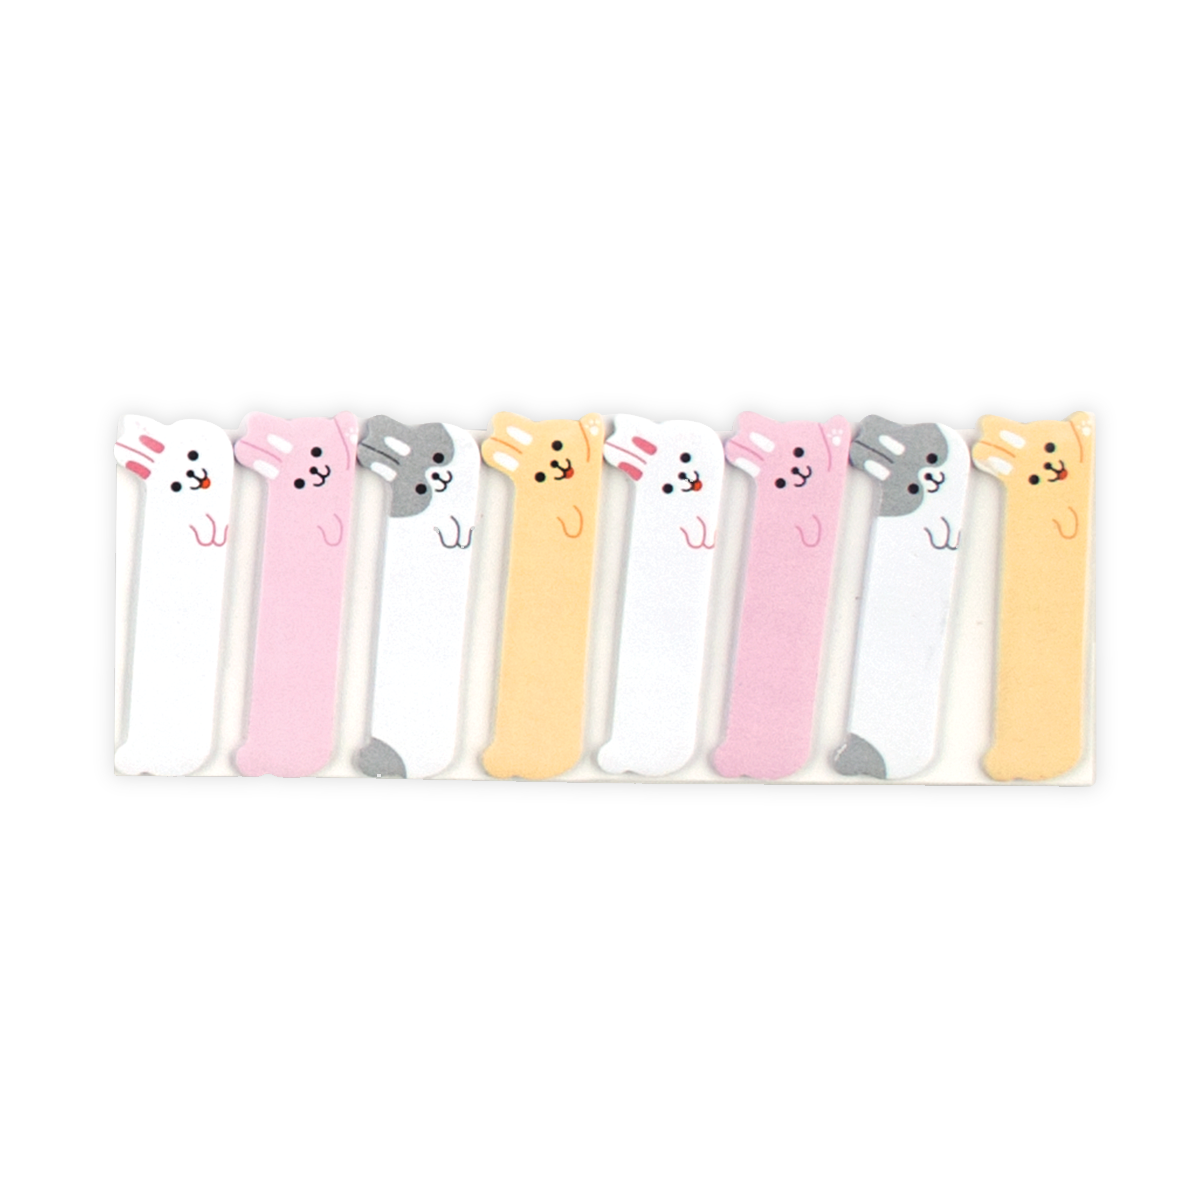 Super cute bunny themed sticky tabs with 4 unique designs and 120 stickers in a set